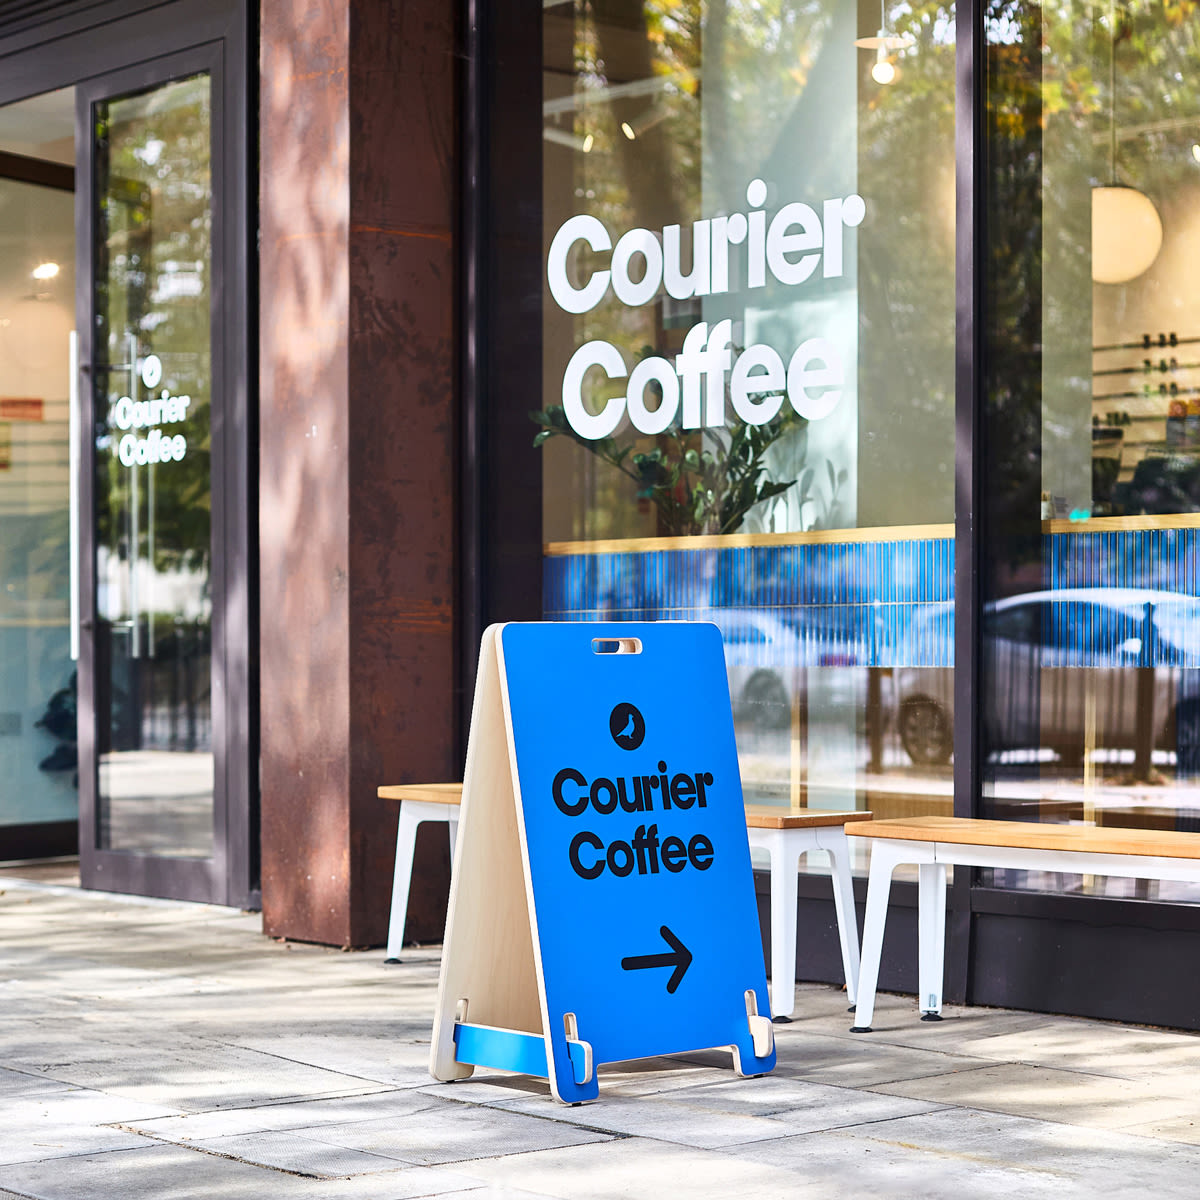 We've opened a coffee shop (yes, really)